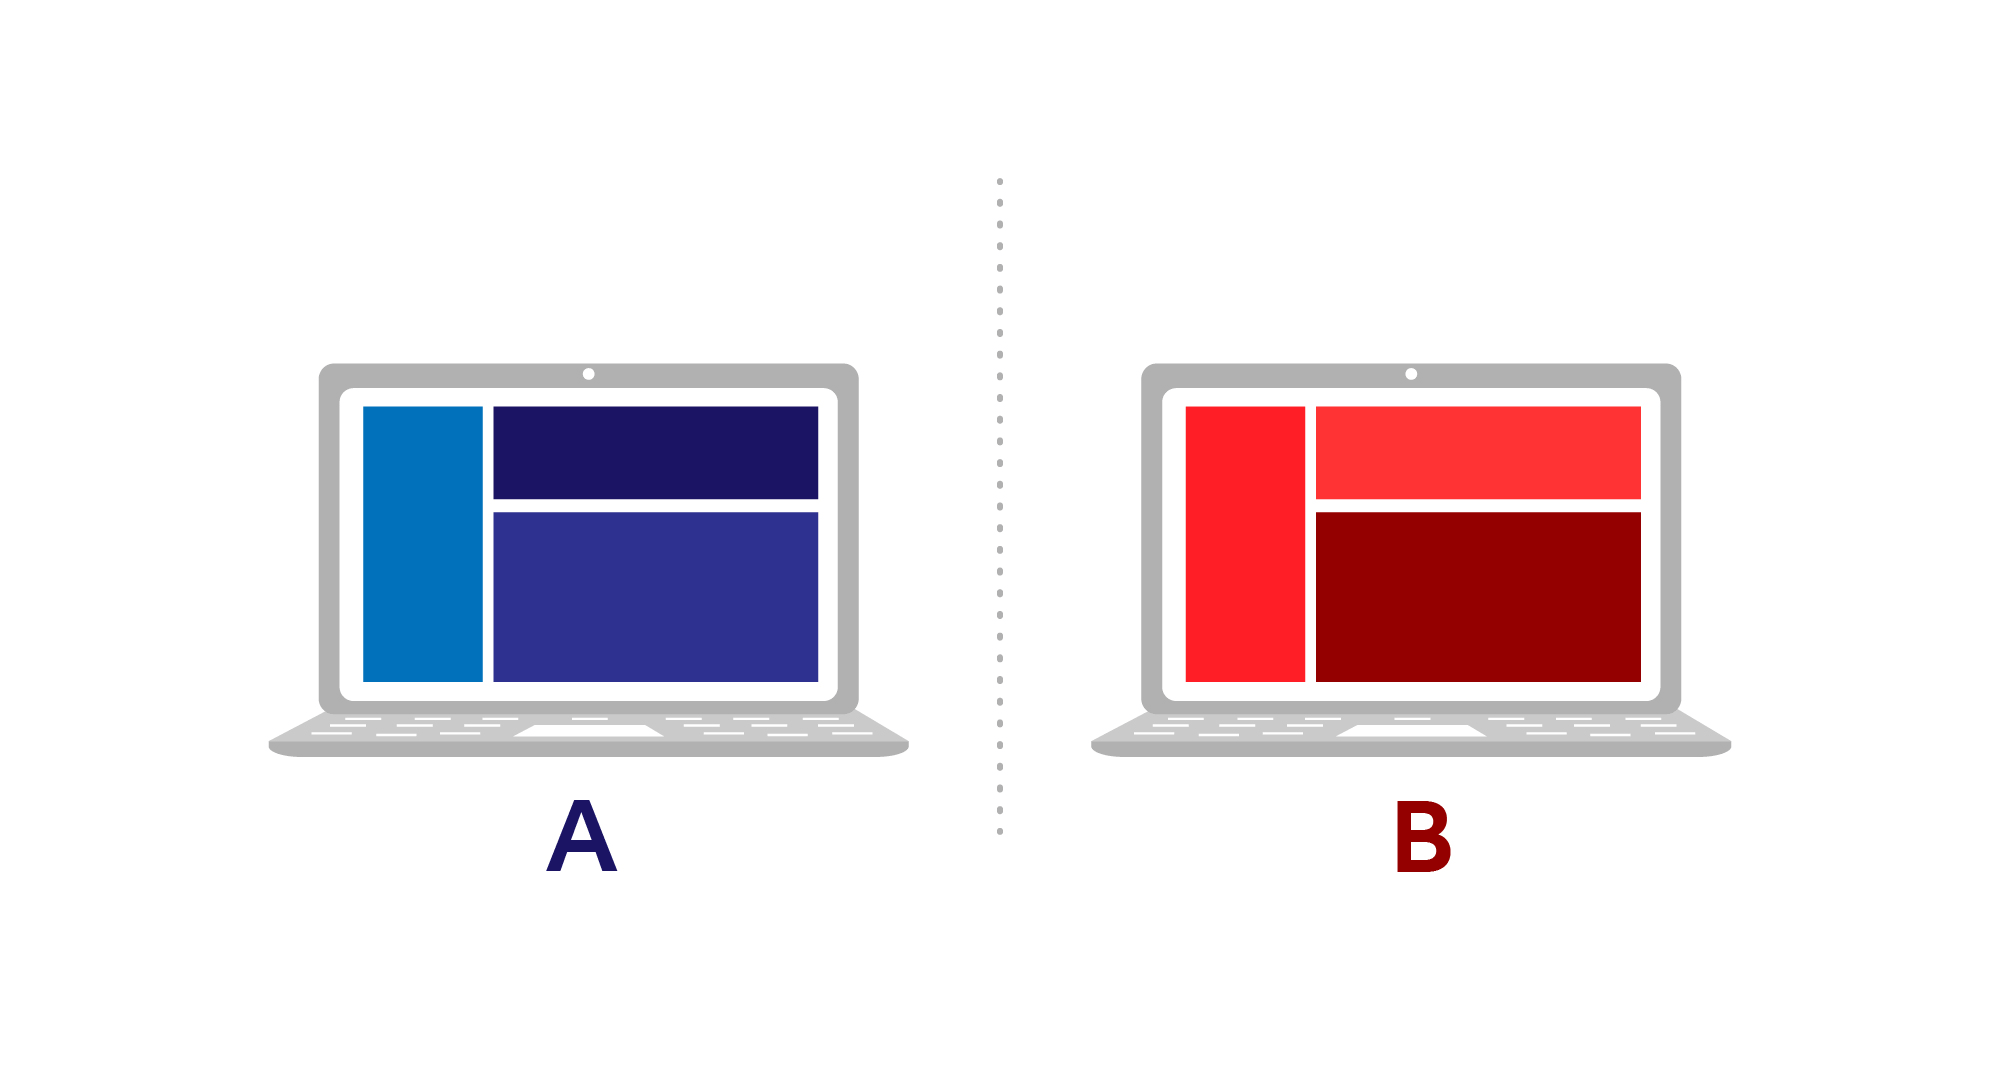 A/B testing is a method of comparing two versions of the same digital marketing assets against each other to test which out of the two performs better.